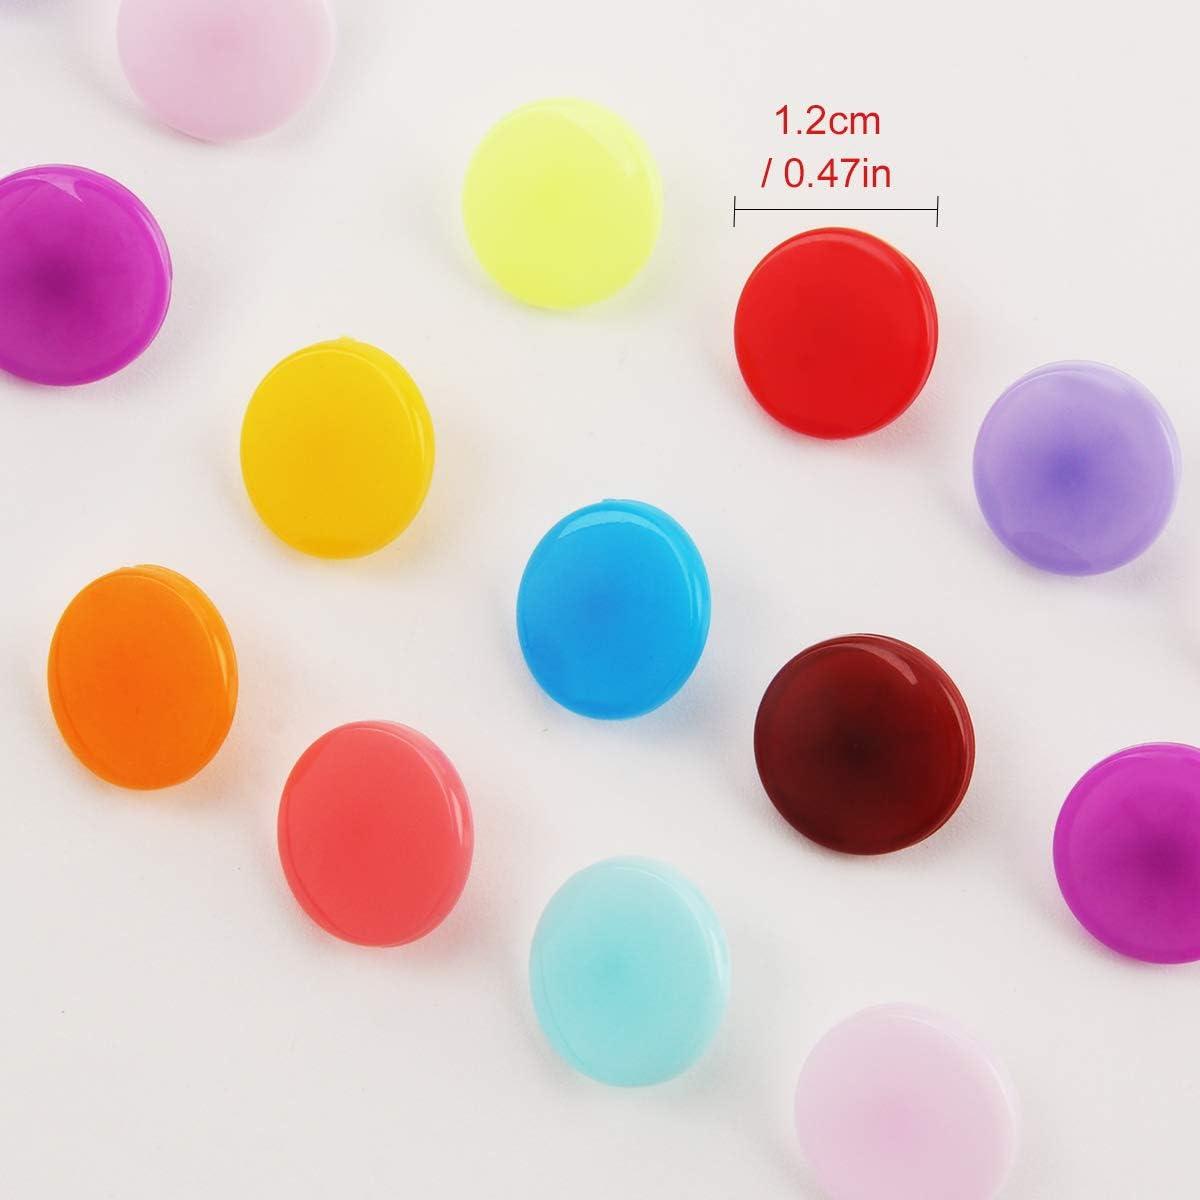 460 Sets 24Color Cenoz Snap Plastic Fasteners Button with Pliers Tool, T5 Resin Plastic Button Sewing Fasteners Punch Poppers No Sew Buttons for